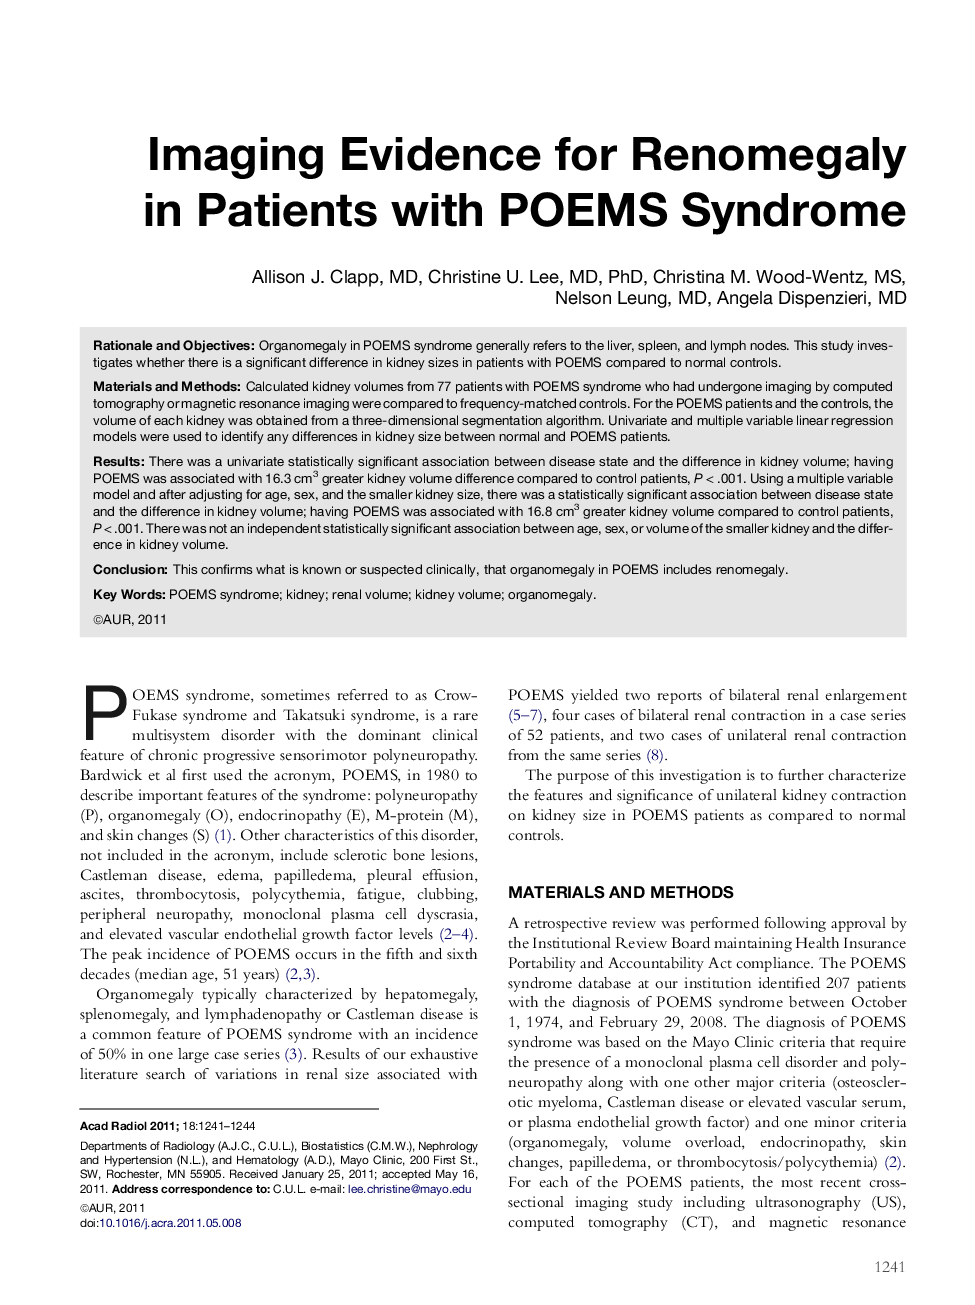 Imaging Evidence for Renomegaly in Patients with POEMS Syndrome